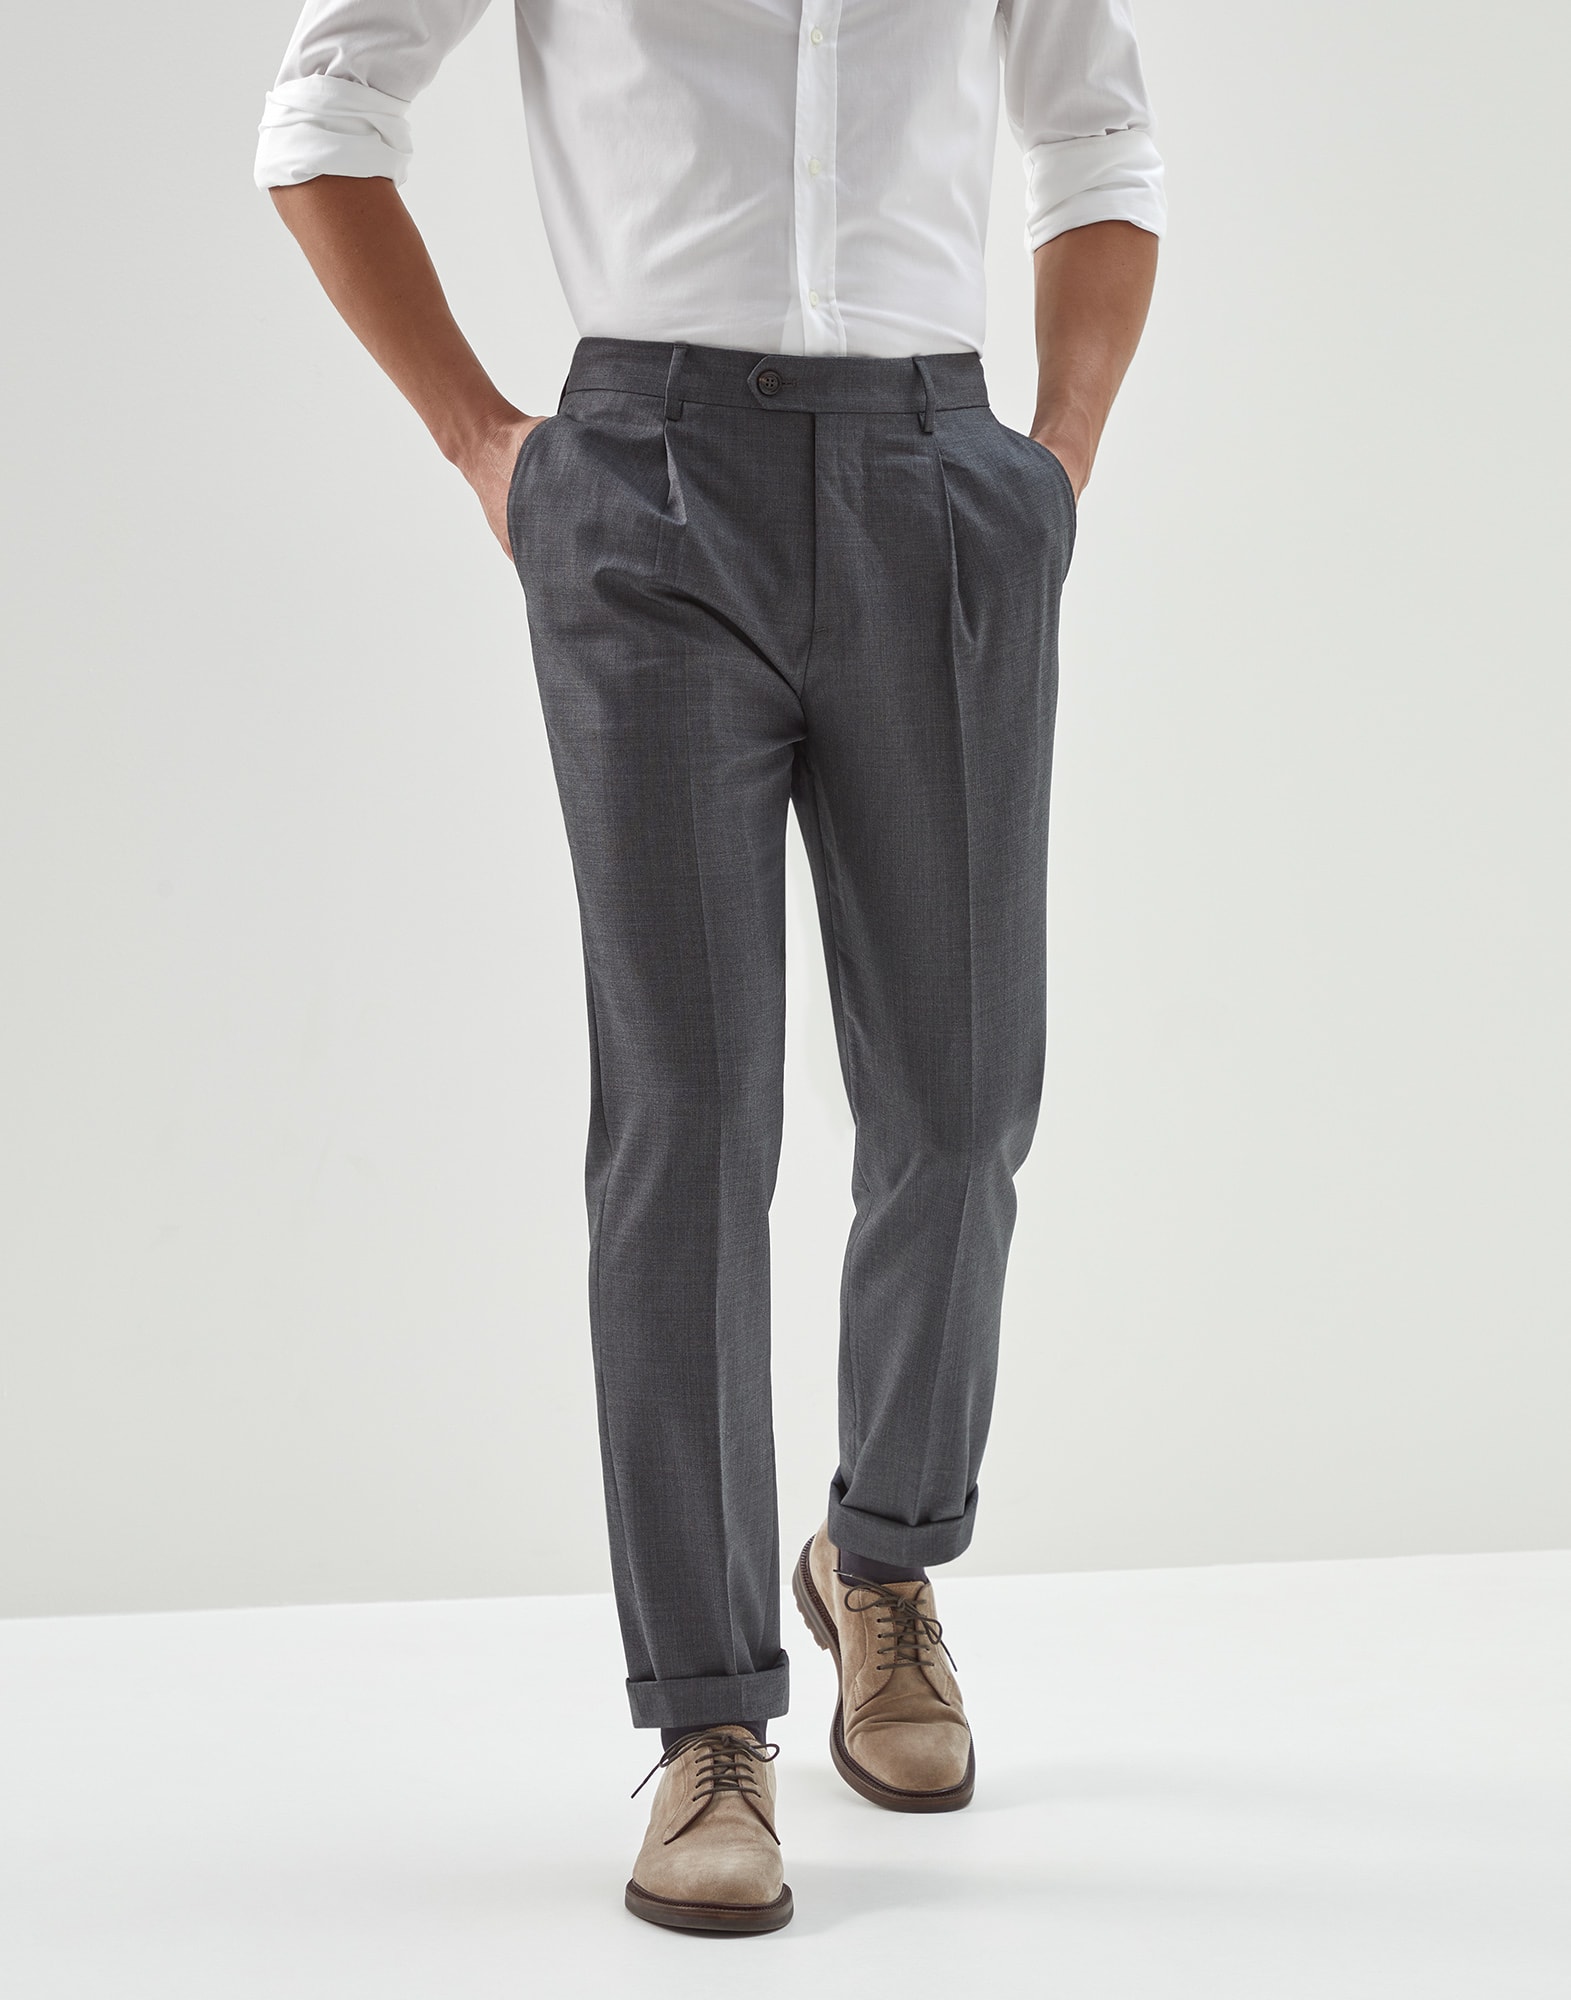 Chic Business Brown High-Waisted Trouser Pants